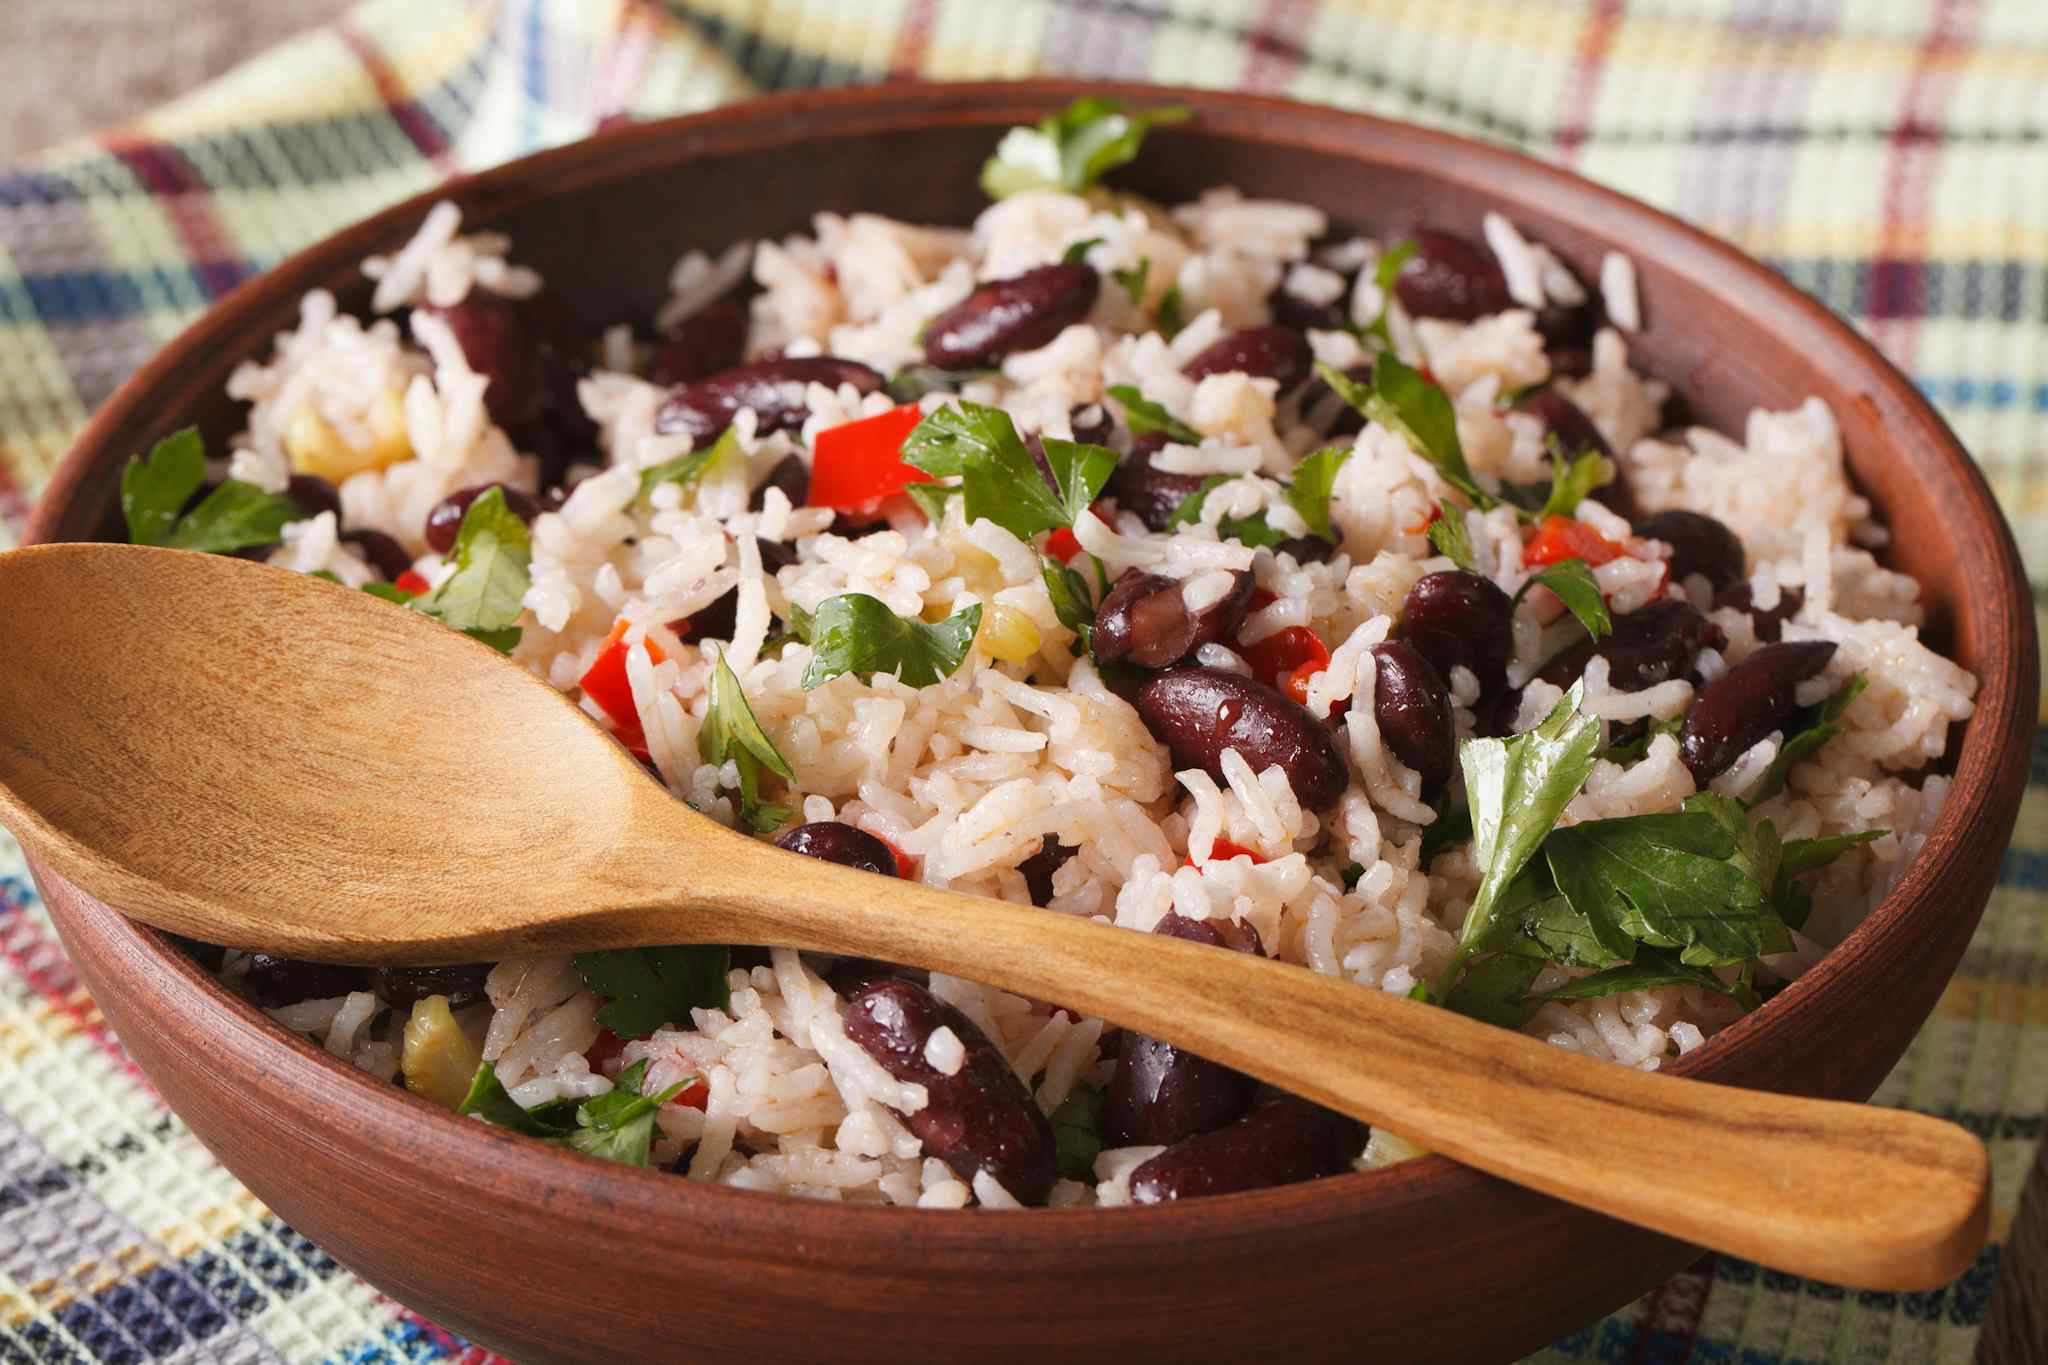 Gallo Pinto – rice with red beans in a bowl, close-up on the table